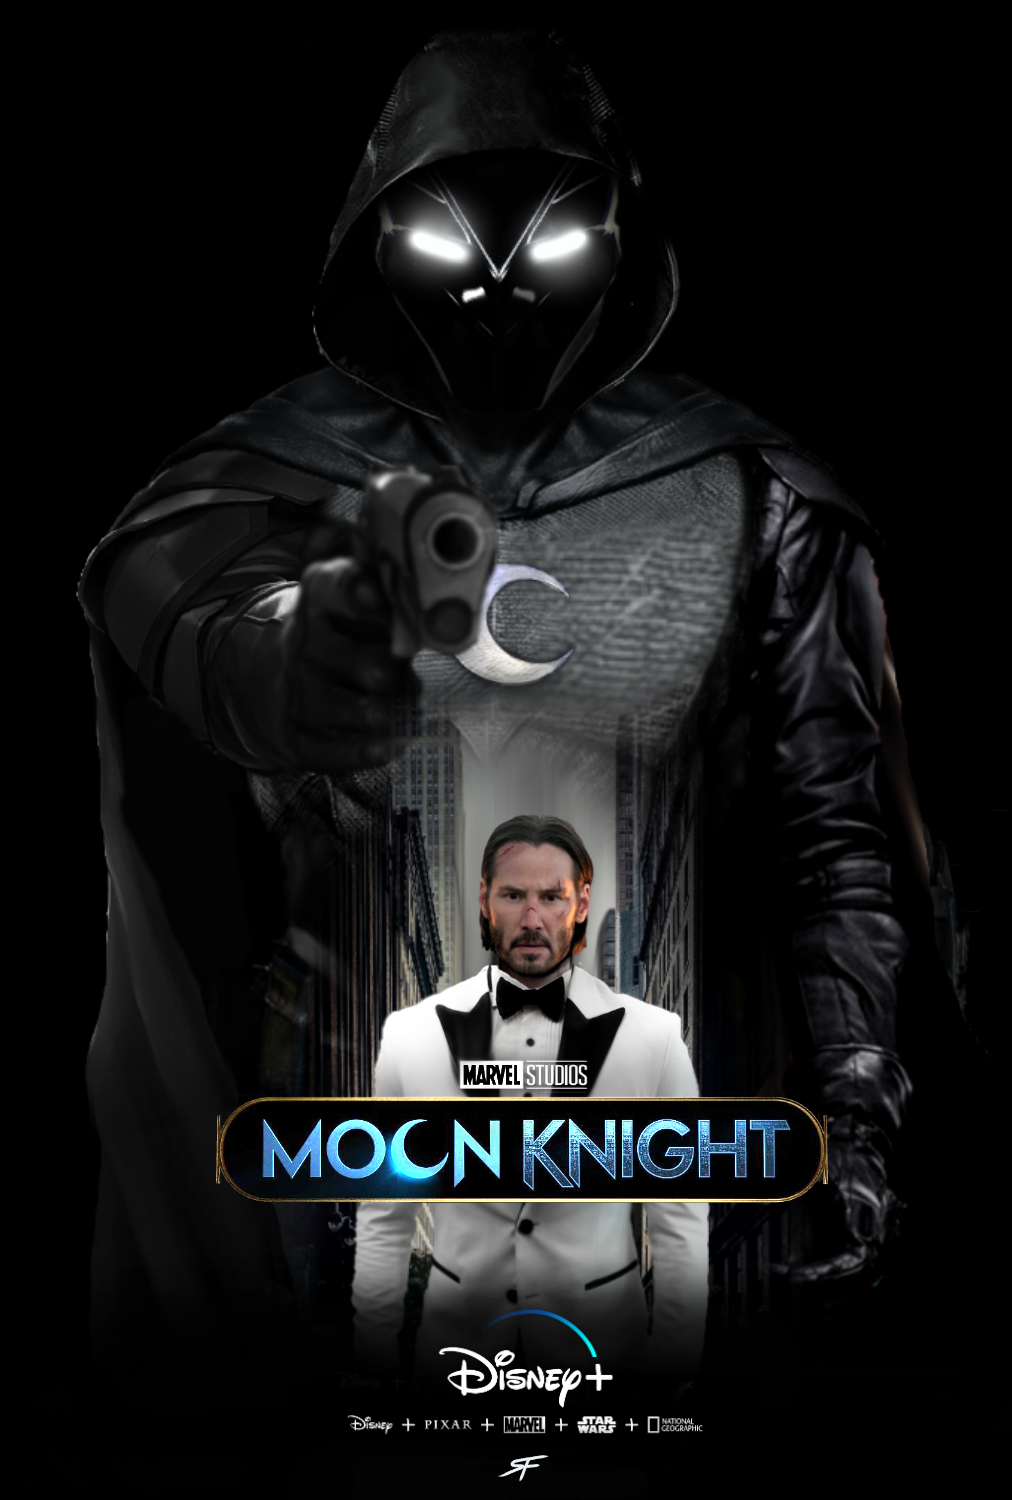 Upcoming American television miniseries created by Jeremy Slater: Moon Knight